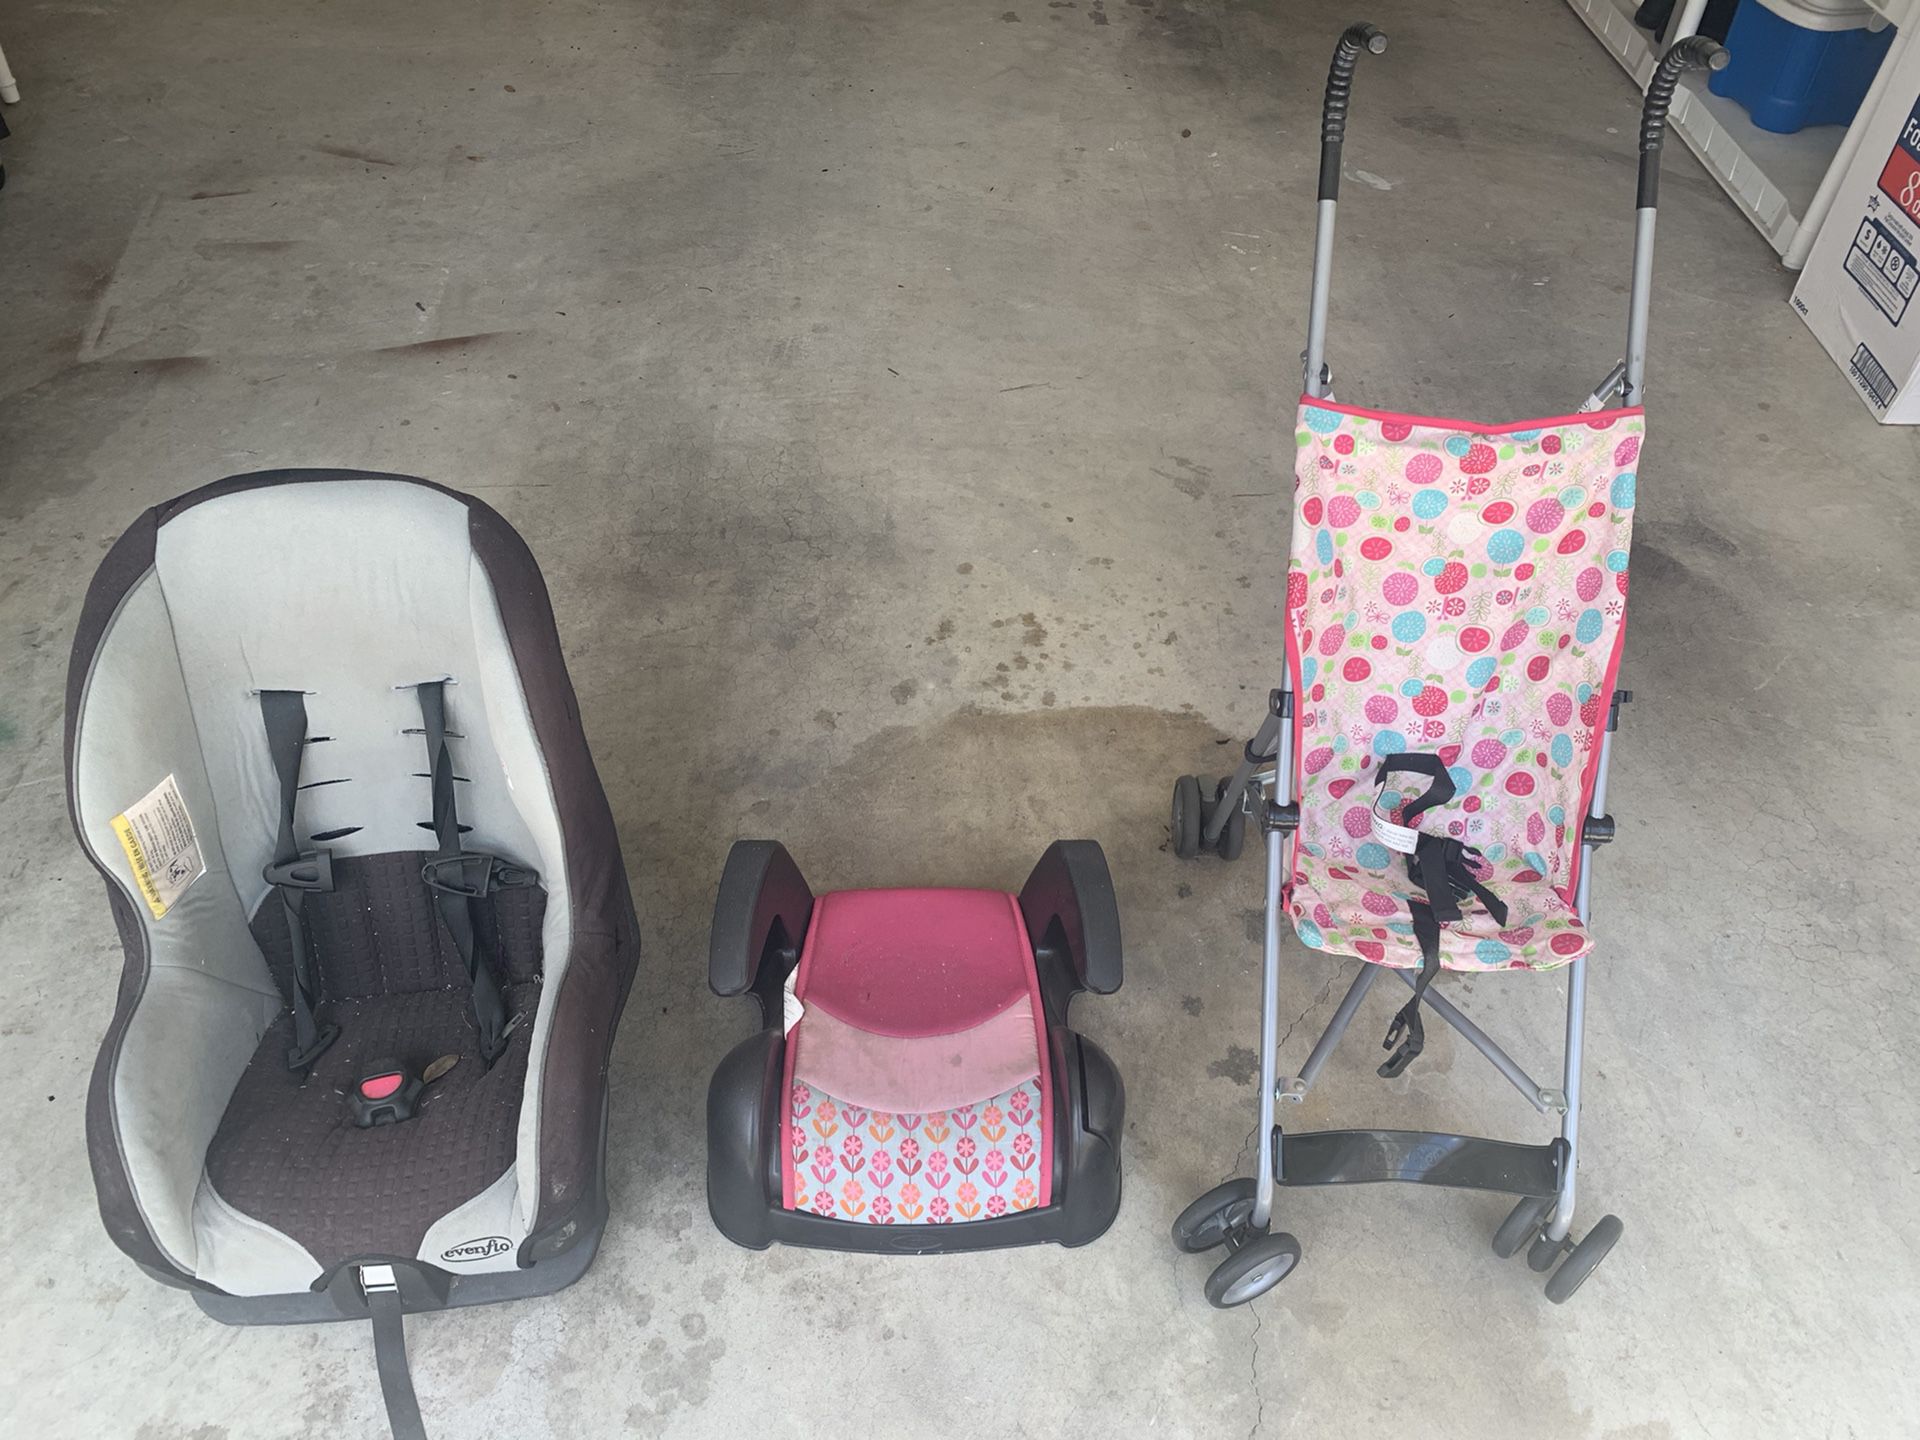 Car seat, booster seat, and stroller